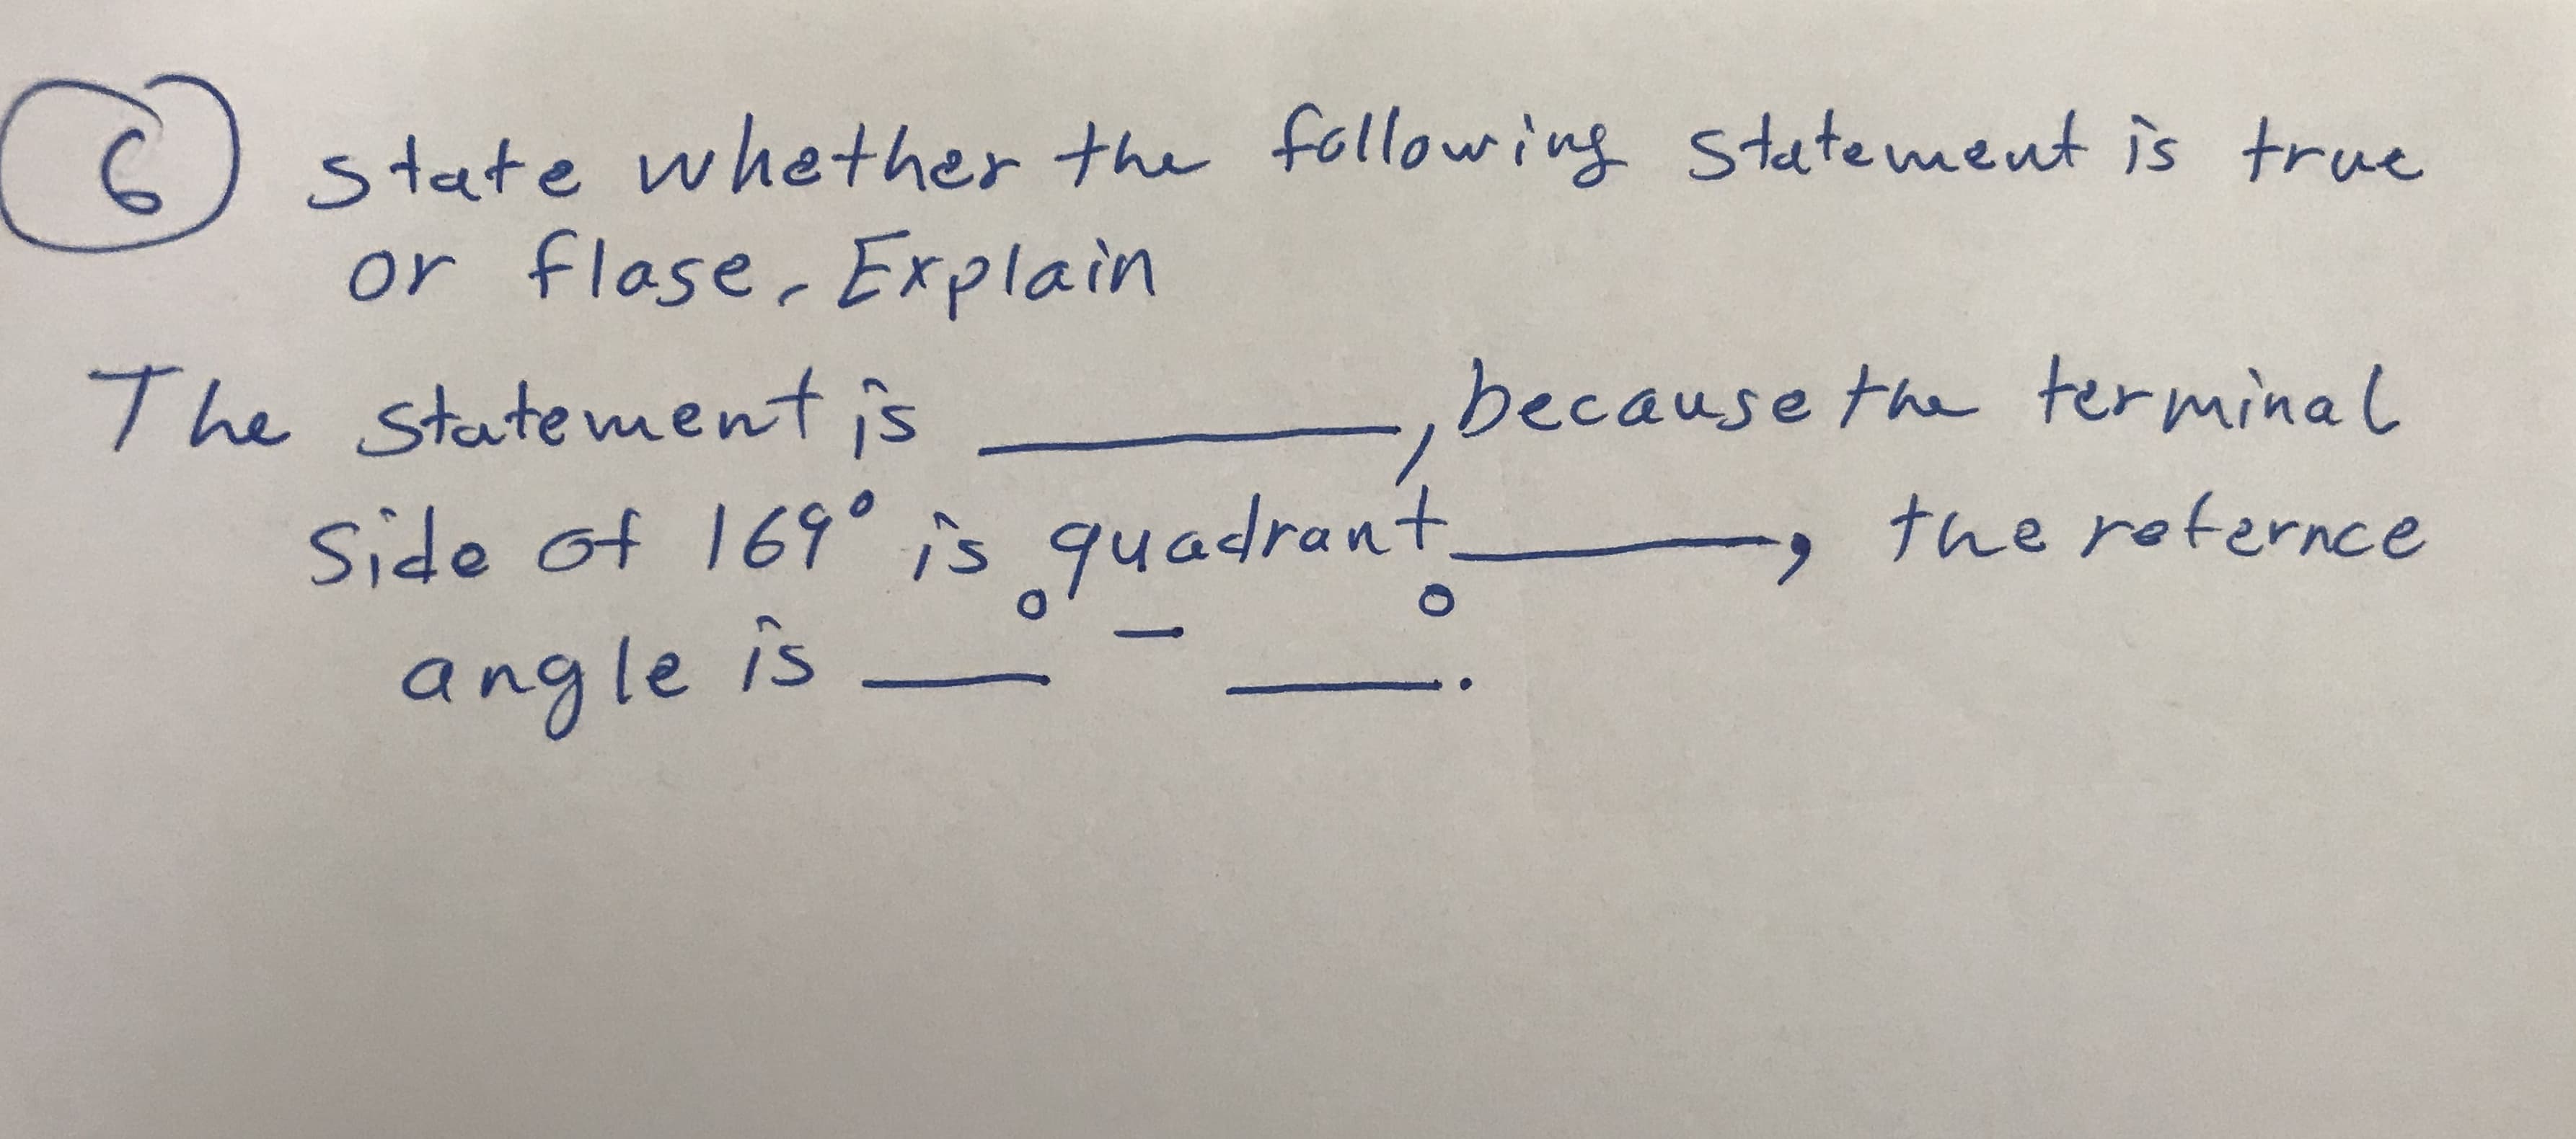 state whether the following statement is true
or flase, Explain
because the terminal
statement is
Side of 169°is quadrant.
the reternce
angle is
